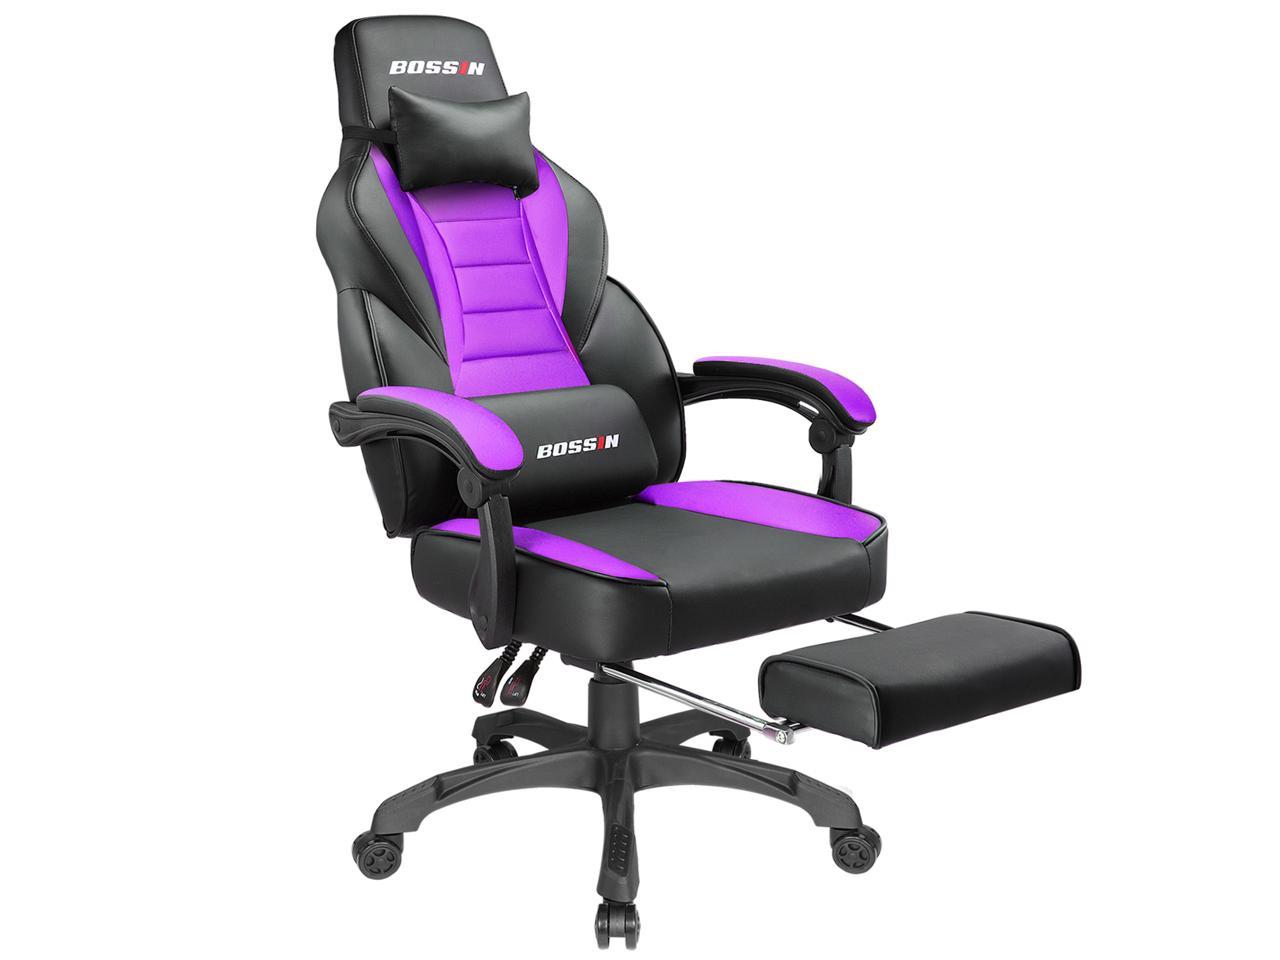 Office Racing PU Leather Recliner,Adjustable Backrest /& Height Swivel Ergonomic Teenage Adult Gift Chair. J Gaming Chair